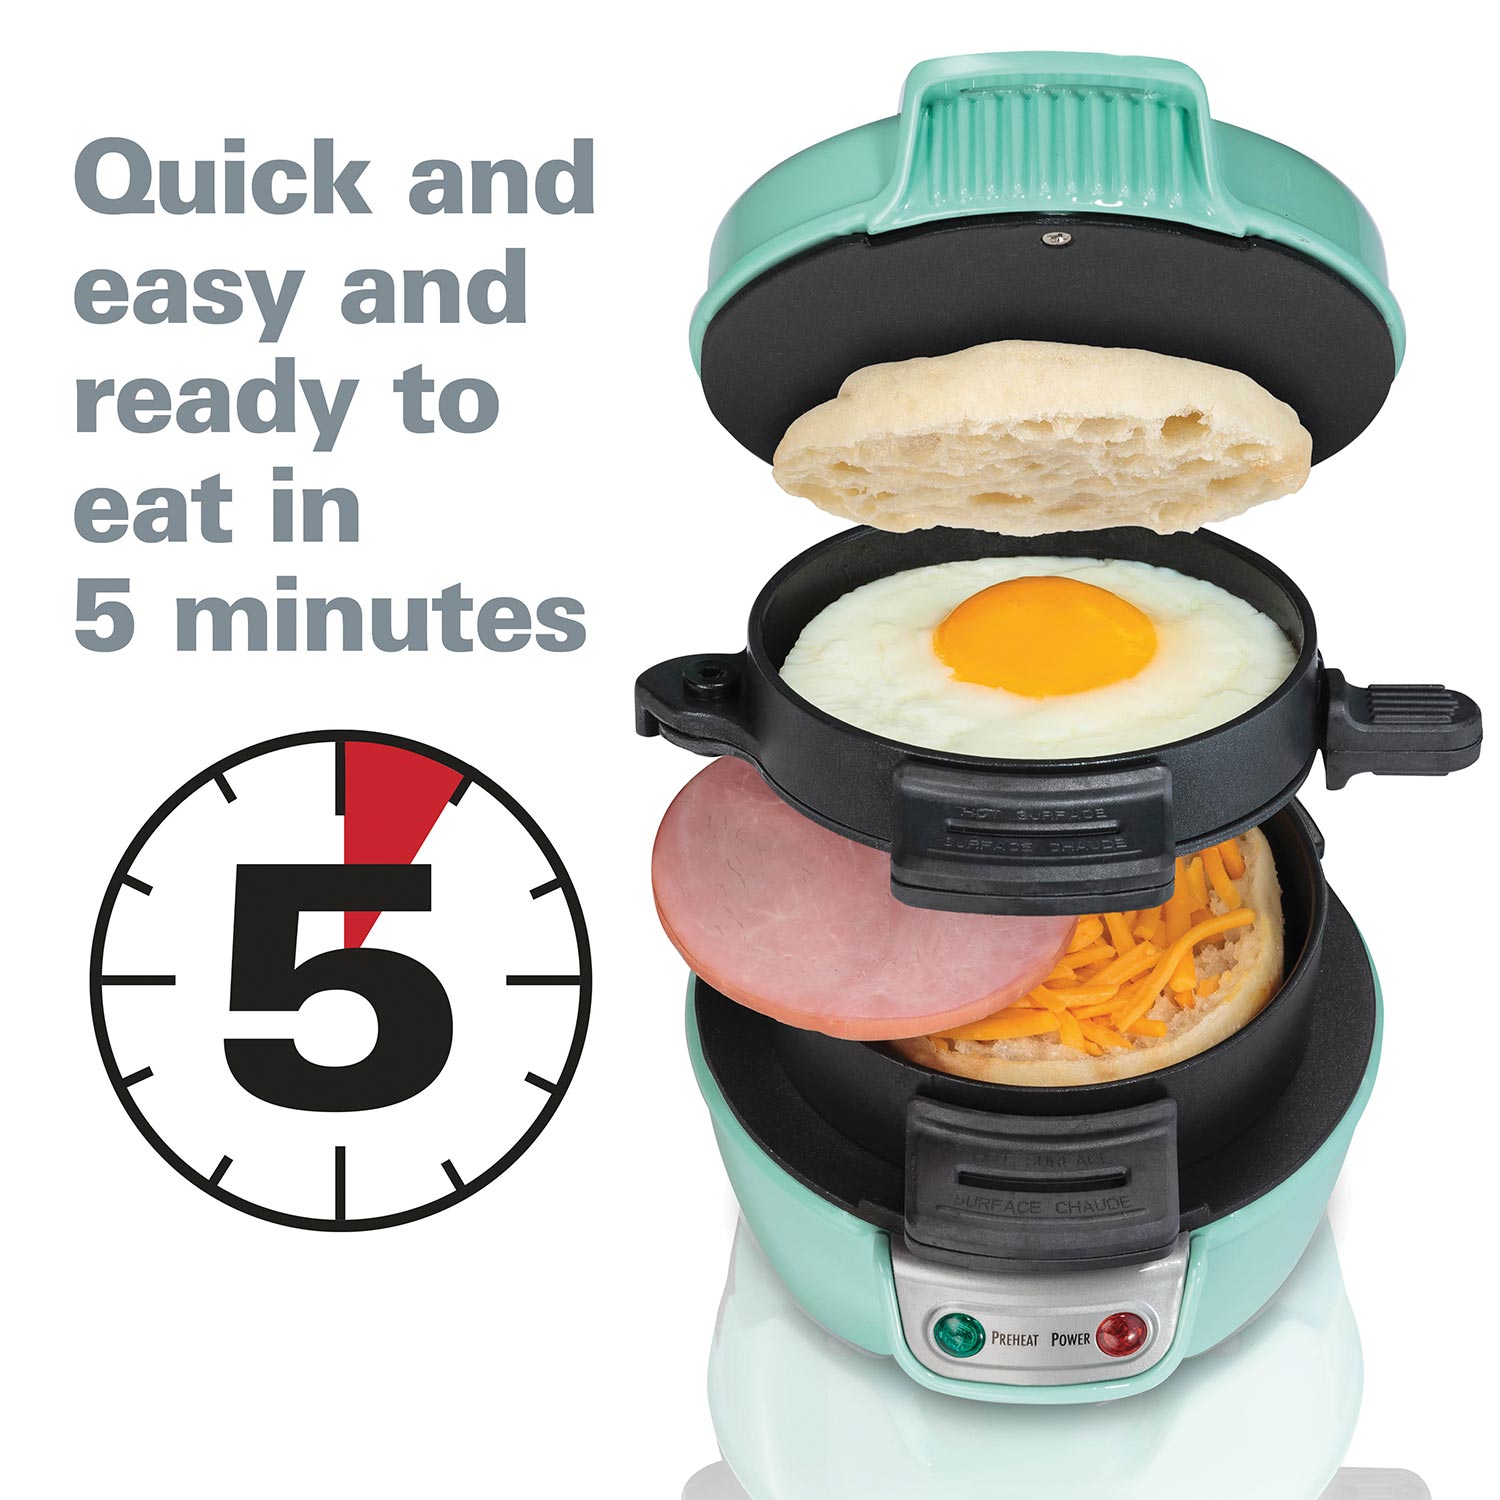 With the Hamilton Beach Breakfast Sandwich Maker, you can make a